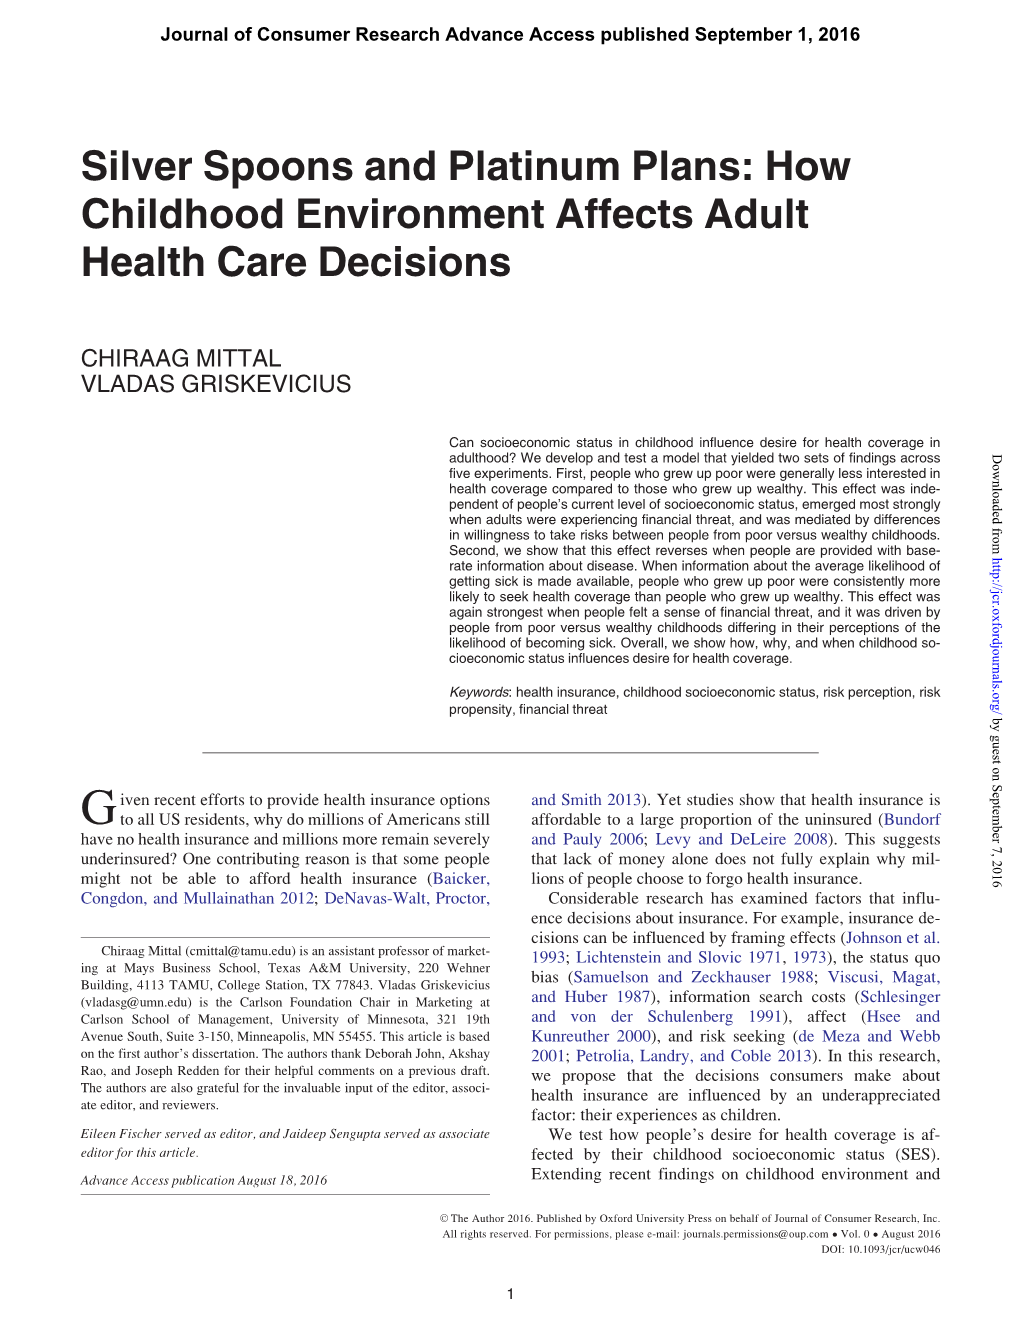 Silver Spoons and Platinum Plans: How Childhood Environment Affects Adult Health Care Decisions